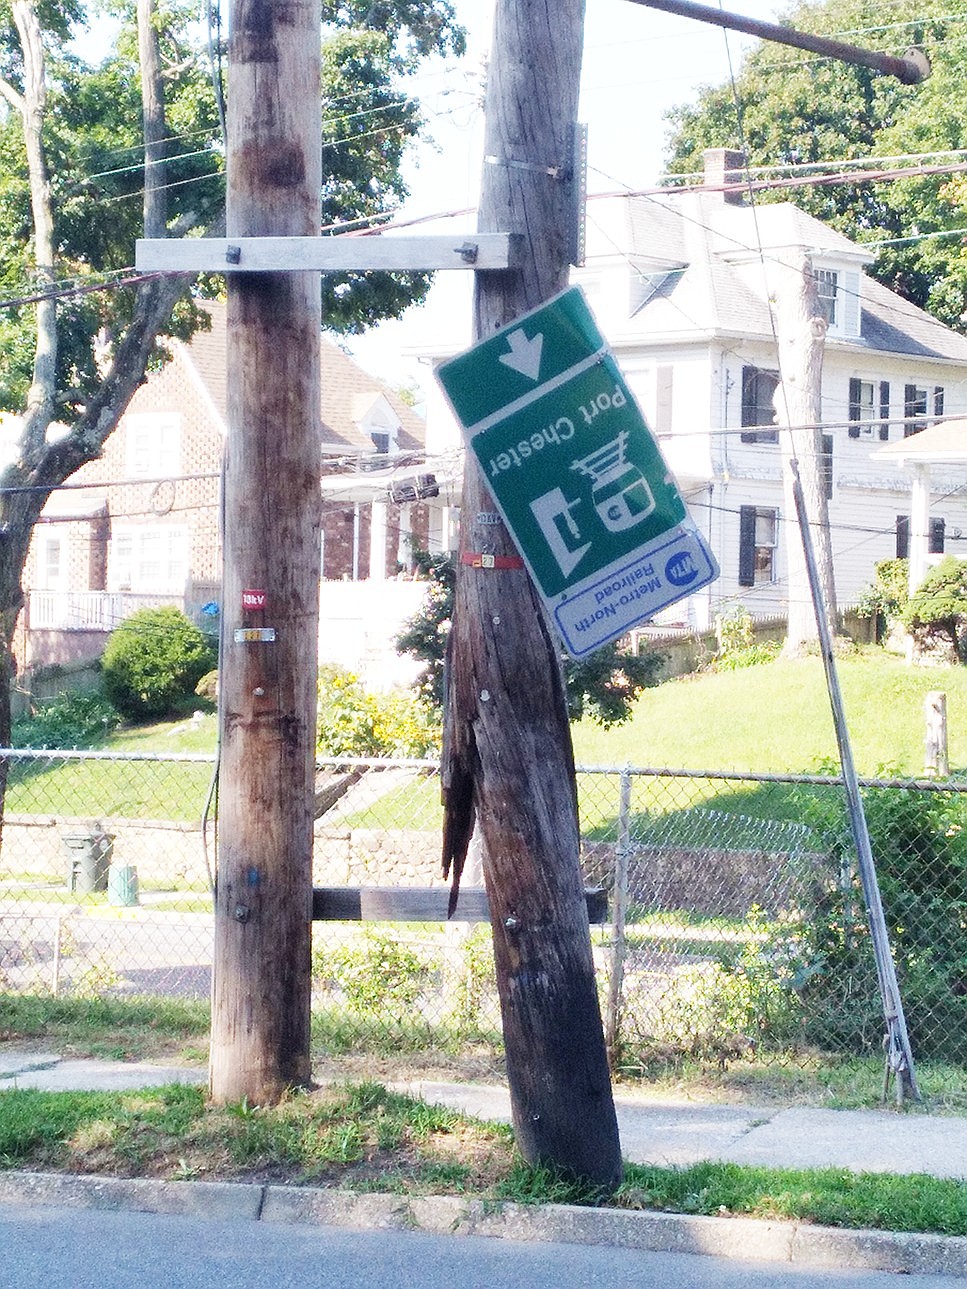 Inverted sign on utility pole across from 325 King St.